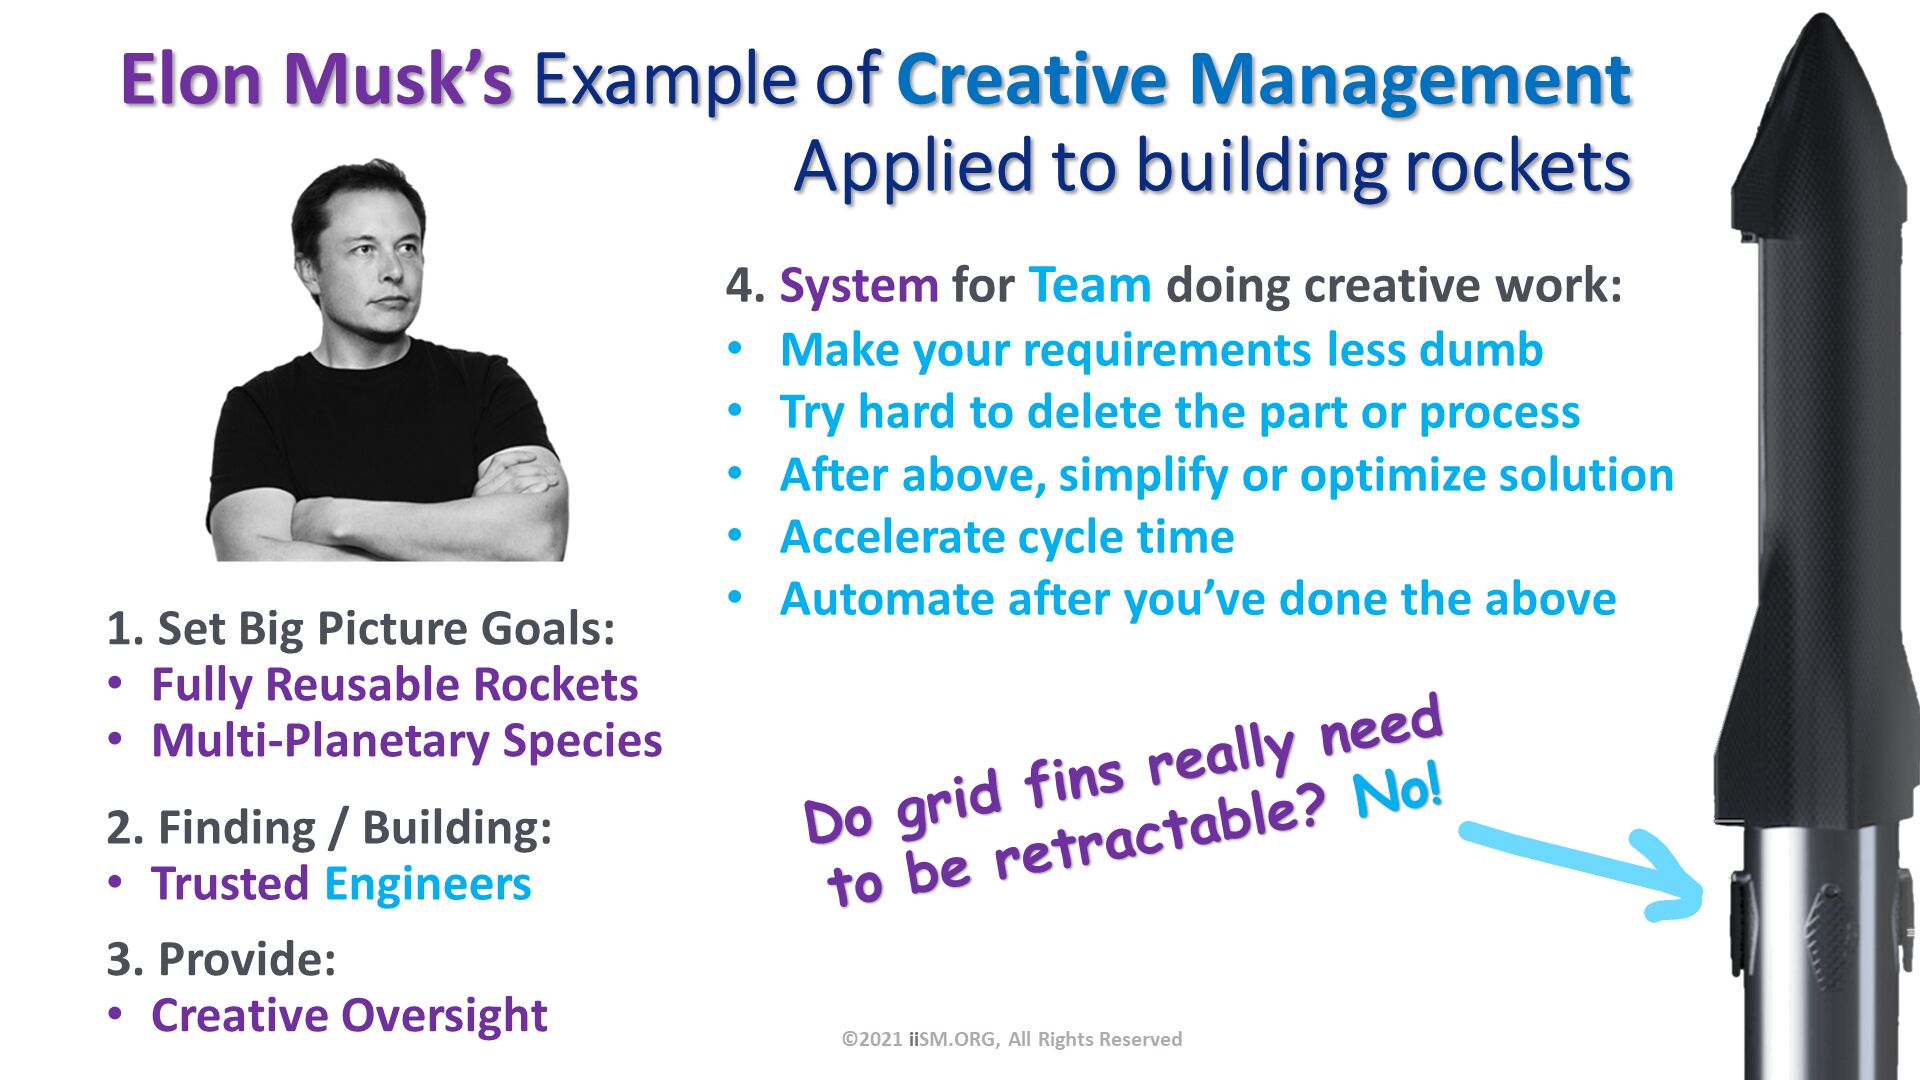 Elon Musk’s Example of Creative Management 
Applied to building rockets. 4. System for Team doing creative work:
Make your requirements less dumb
Try hard to delete the part or process 
After above, simplify or optimize solution
Accelerate cycle time
Automate after you’ve done the above. ©2021 iiSM.ORG, All Rights Reserved. Do grid fins really need to be retractable? No!. 